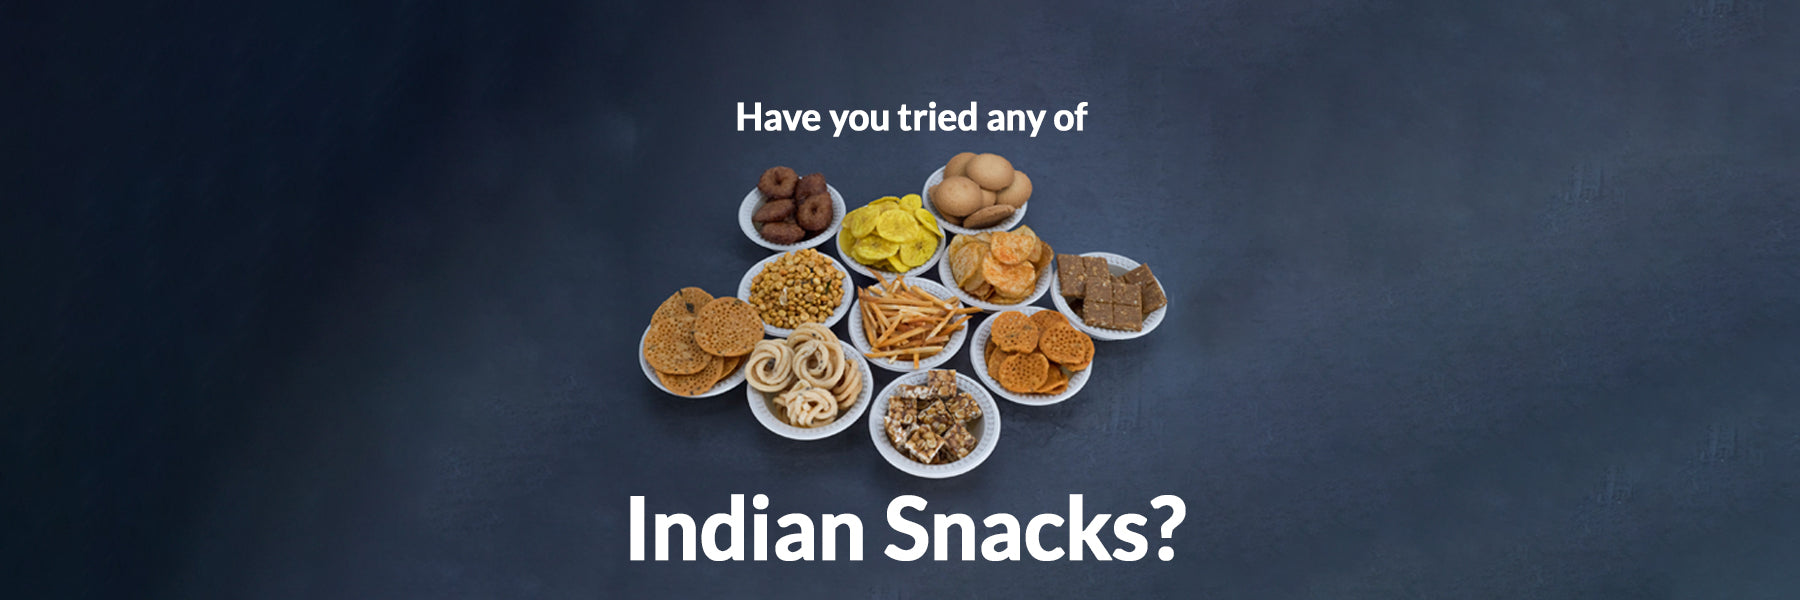 Have you tried any Indian snacks? FromIndia.com